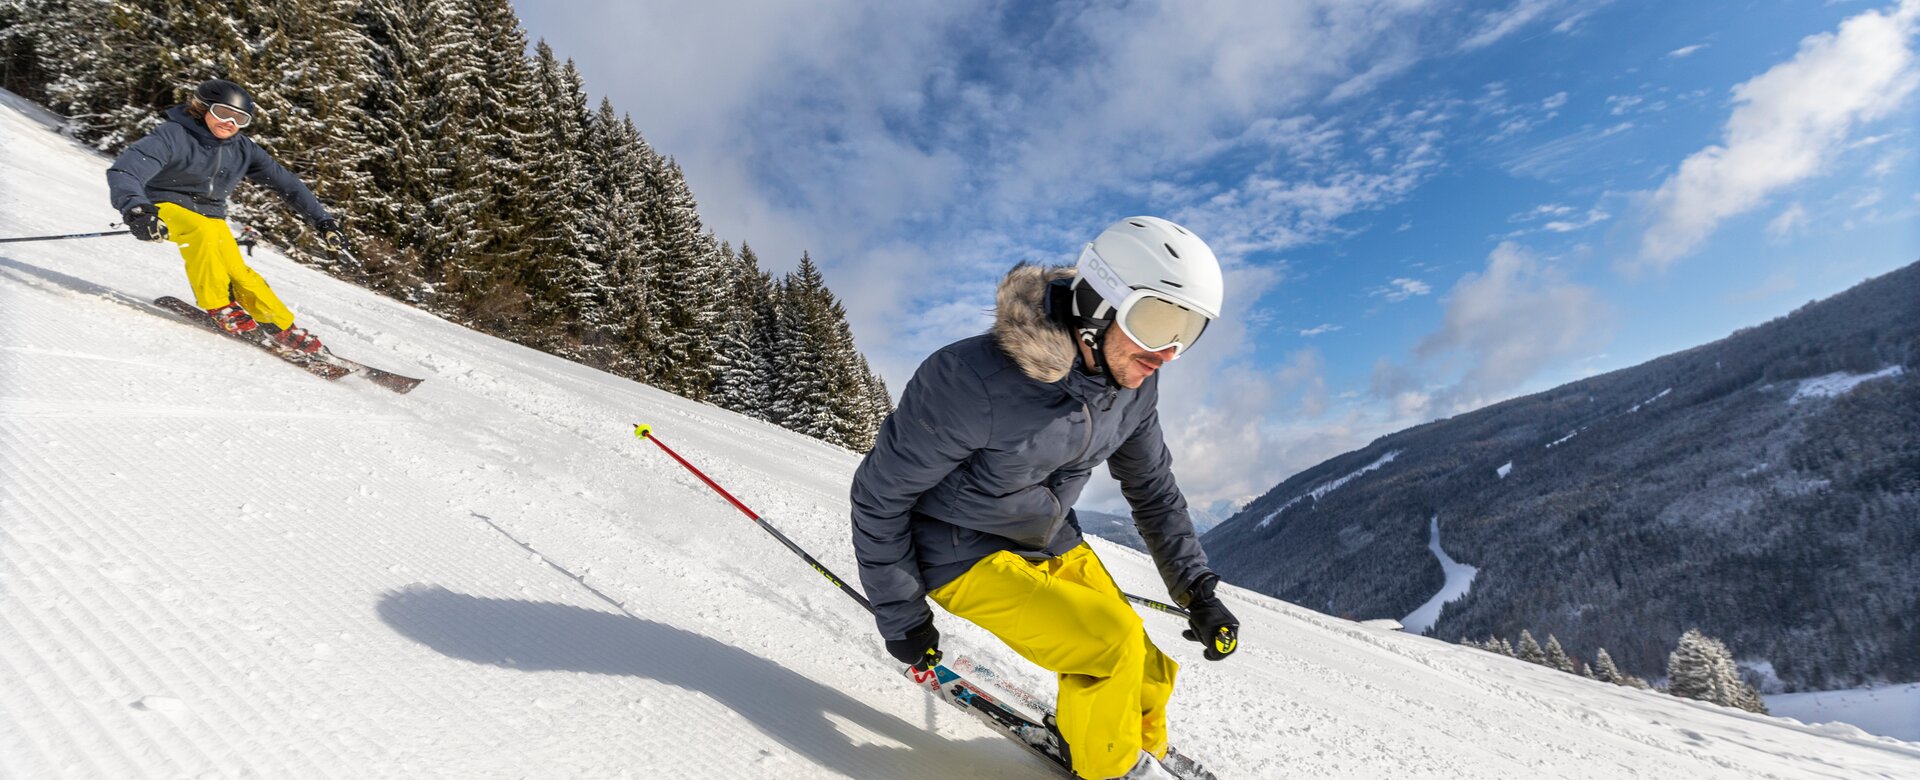 Two skiers, each wearing yellow trousers and a grey jacket, take the bend to ski down the piste